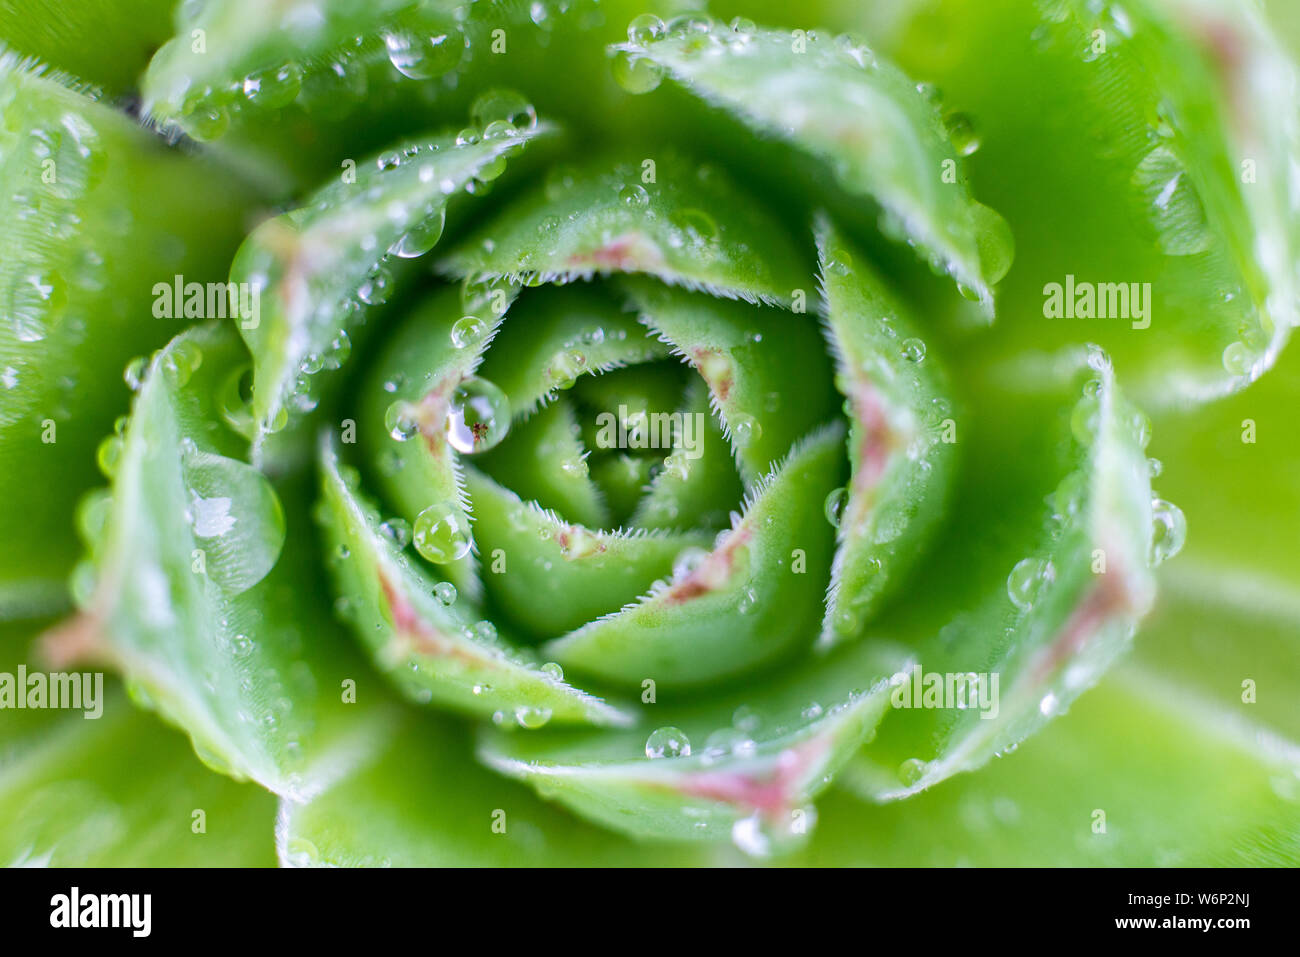 Top view of broadleaf stonecrop leaves with rain, dew drops. Latin name - Sedum Pachyclados. Stock Photo